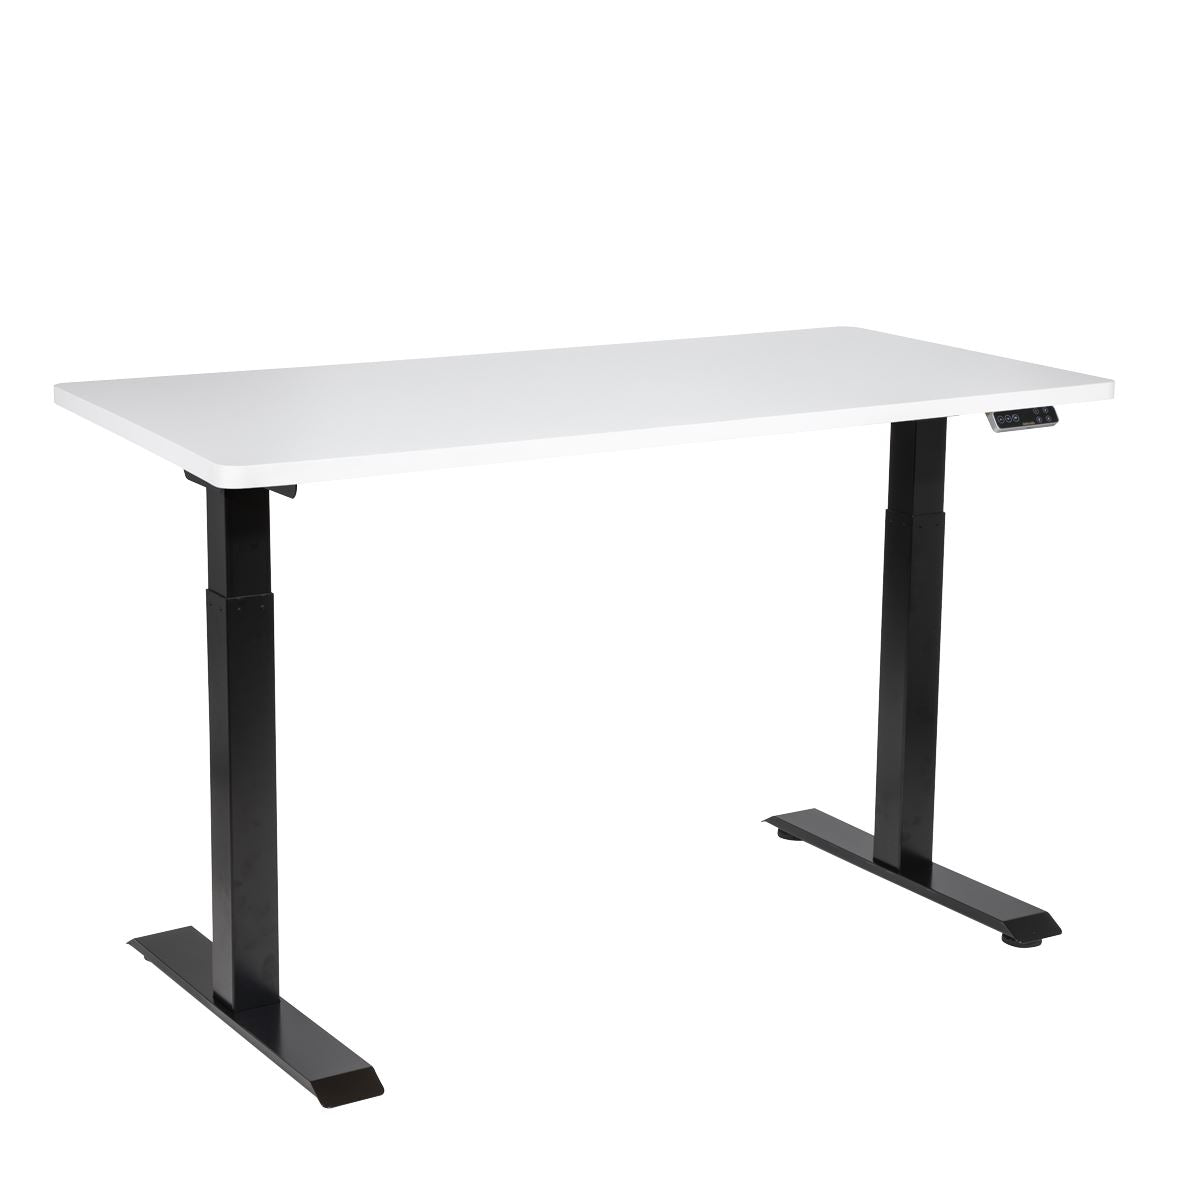 Dellonda White Electric Height Adjustable Standing Desk, 1400 x 700mm Dual Motor 100kg